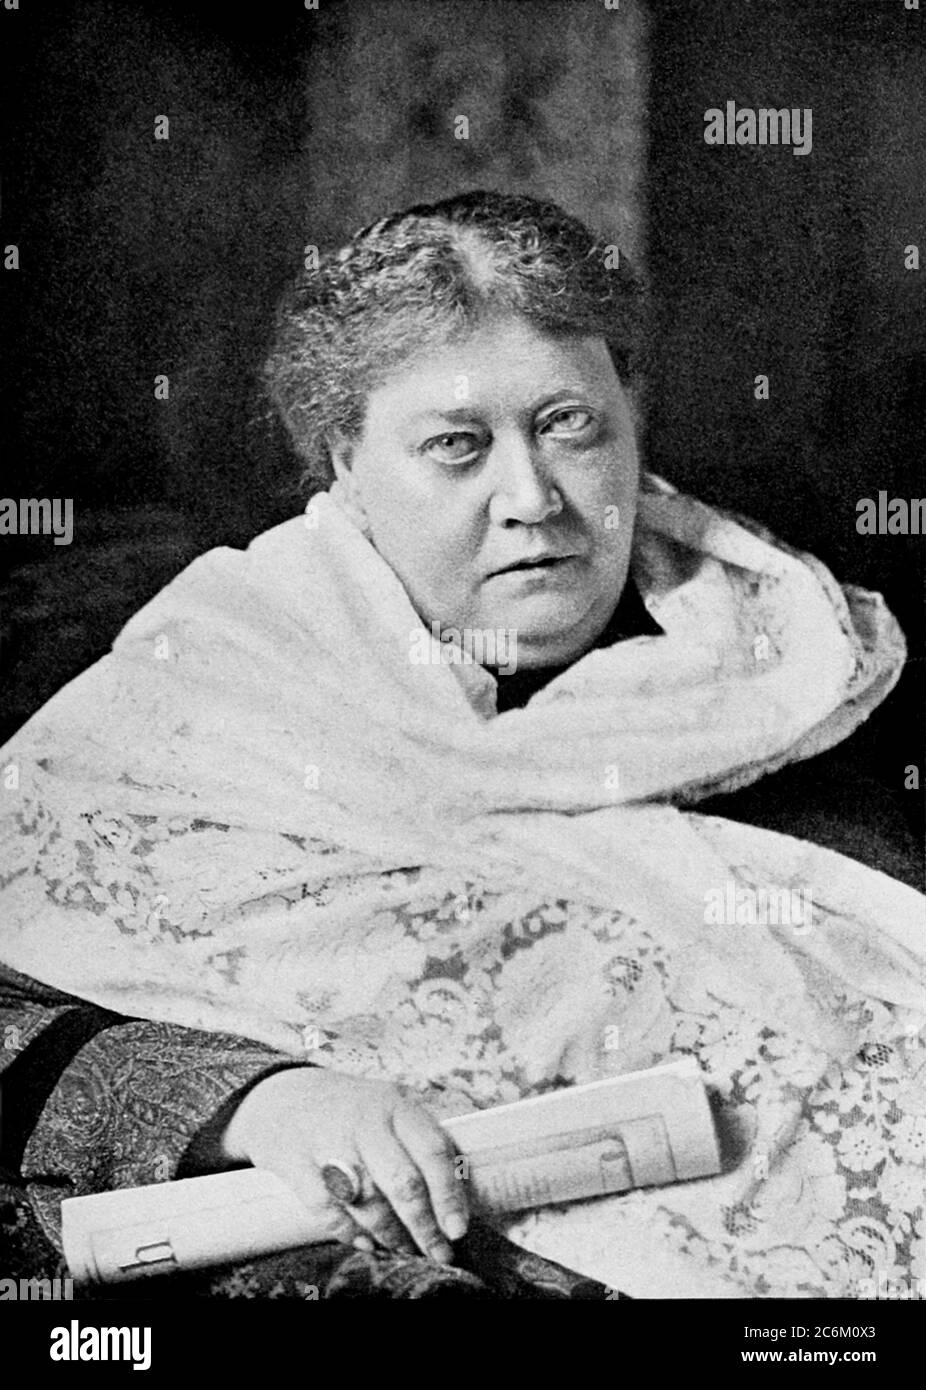 1890 c. , USA : The russian-born Madame Helena Petrovna BLAVATSKY von Hahn ( 1831 - 1891 ). Celebrated woman Theosopyst , phylosopher , occultist, mystic , spiritualist traveller and writer . Founder of THEOSOPHICAL SOCIETY in 1875 . In this photo with the ring of HIGHT PRIESTESS with symbol of Theosophy: ring with green stoneflecked with veins of blood red engraved with interlaced triangles in a circle, with in dian motto Sat ( Life ), was gived to Blavatsky by her Indian teacher Damodar Mavalankar in 1880  .- MEDIUM - Medianità - Sedute spiritiche - spiritualism - theosophy  - OCCULTISMO - O Stock Photo